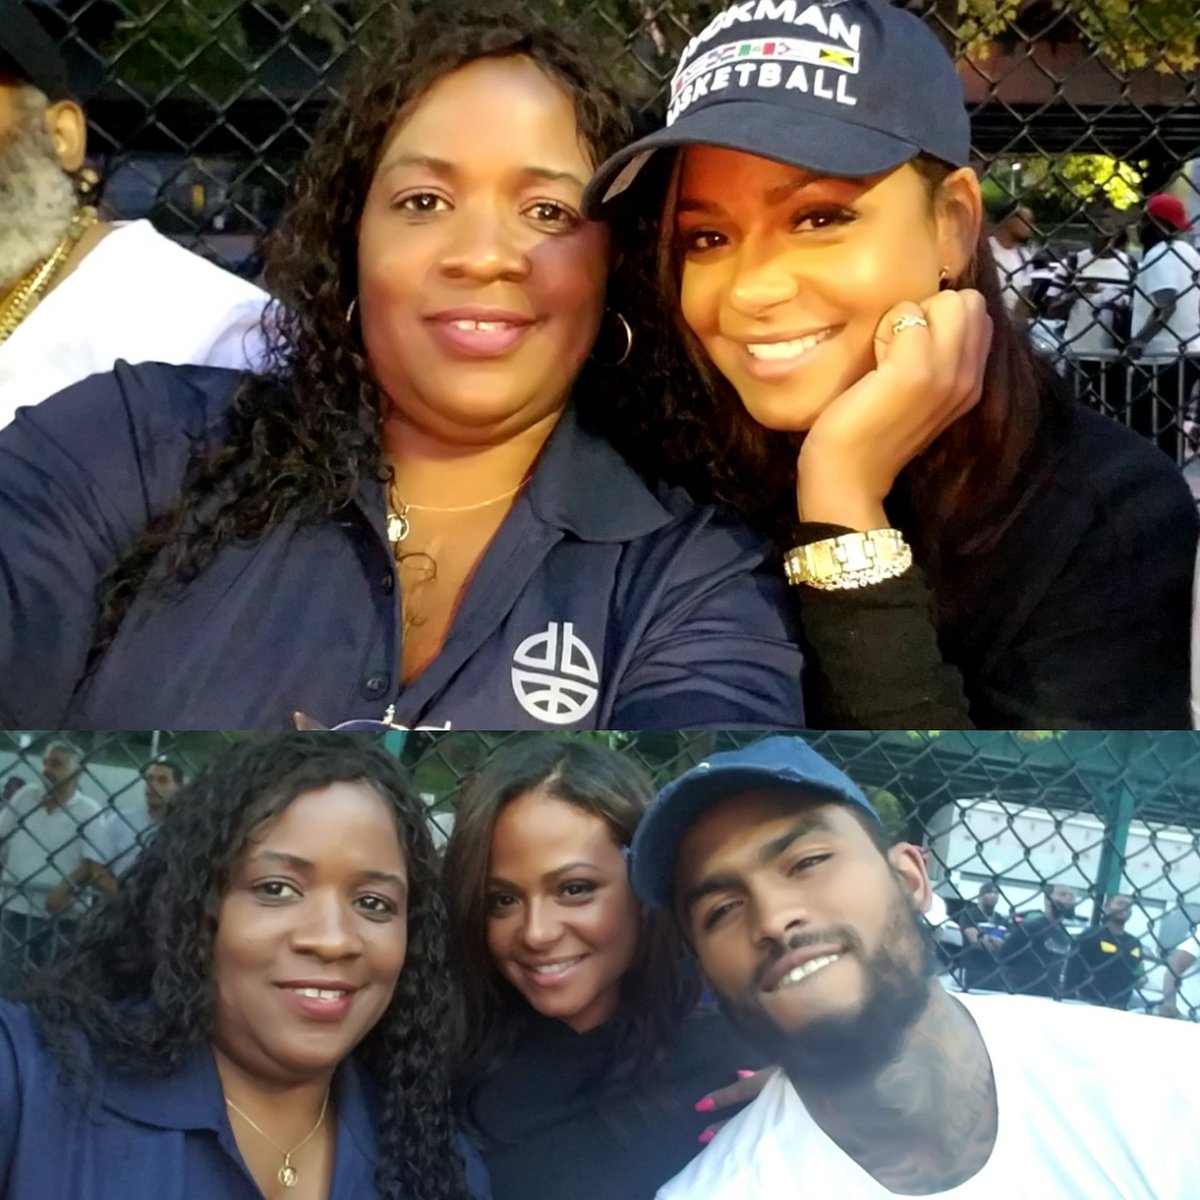 RT @SBond1: @ChristinaMilian with @DaveEast   @IamDyckman  Thank you Mikey from DP  great look https://t.co/apnJRStelm